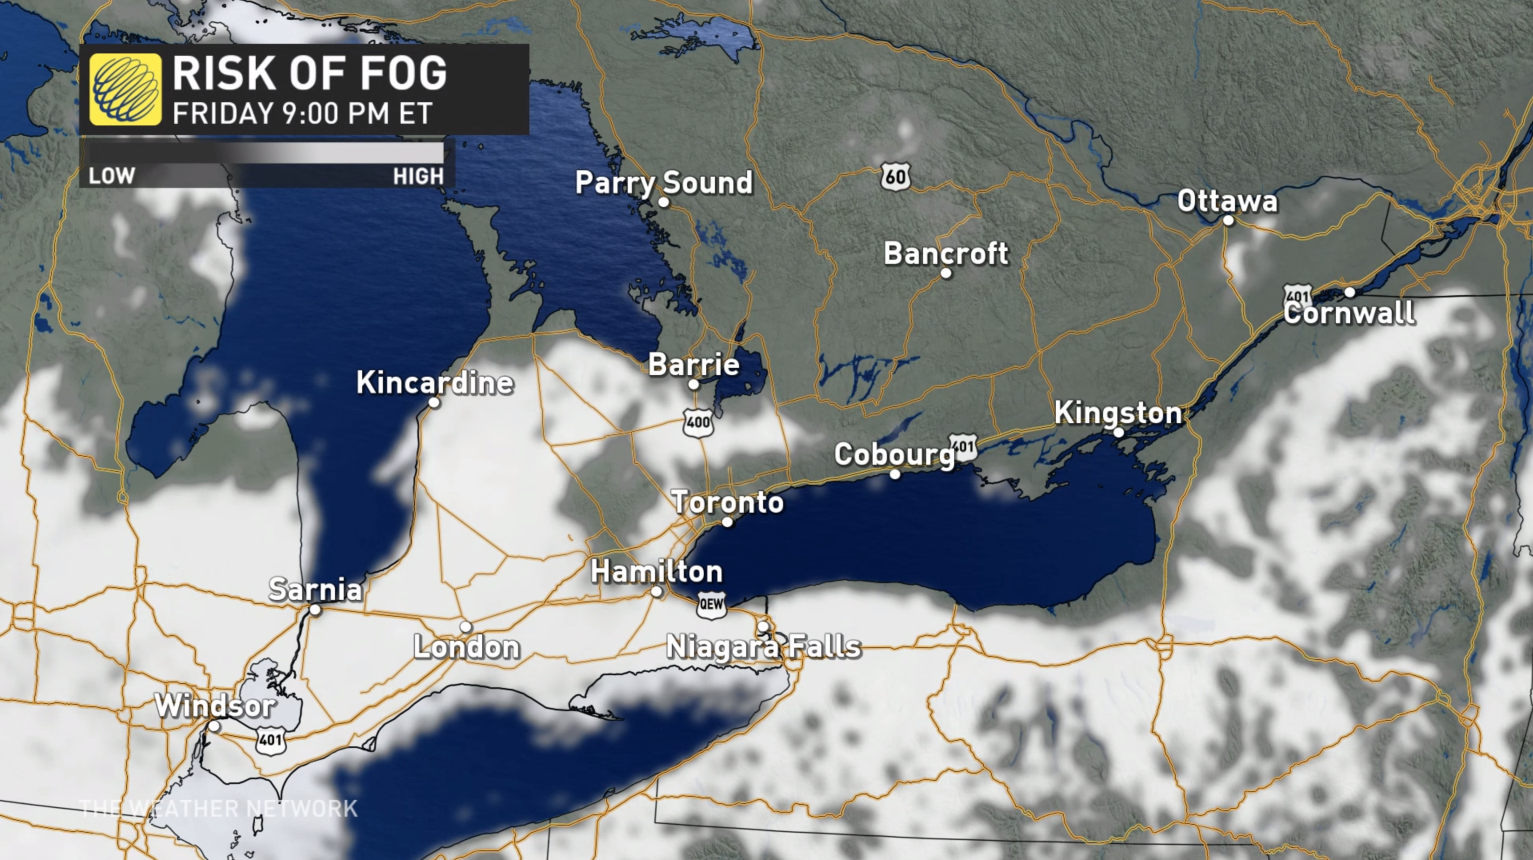 southern ontario stuck in a multi-day fog, again, with more heavy rain coming